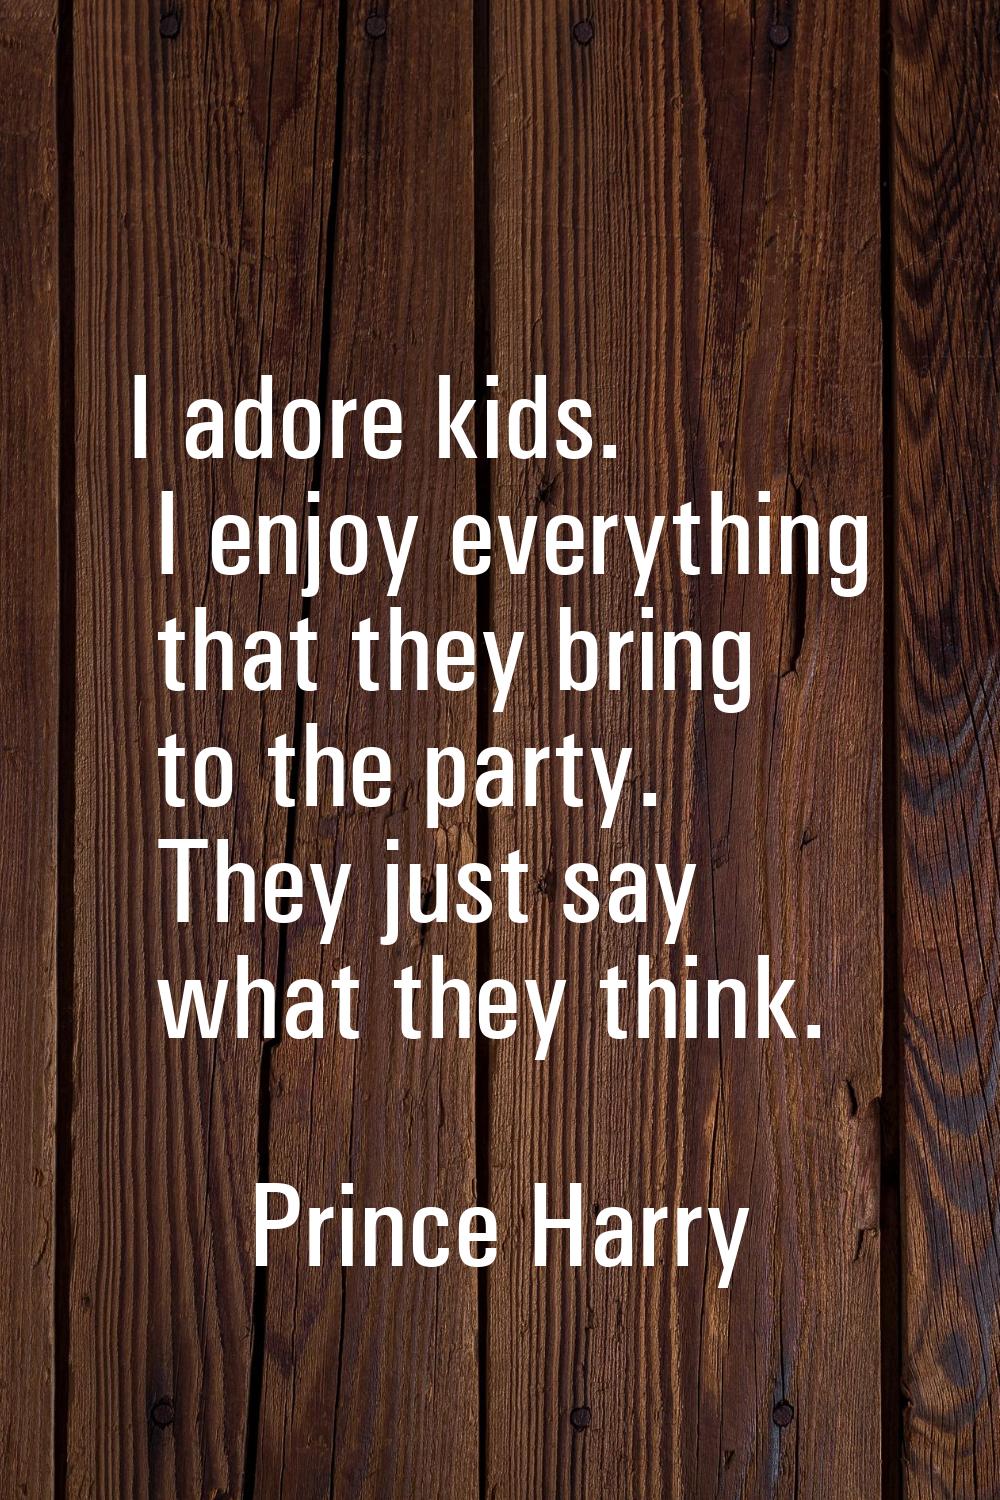 I adore kids. I enjoy everything that they bring to the party. They just say what they think.